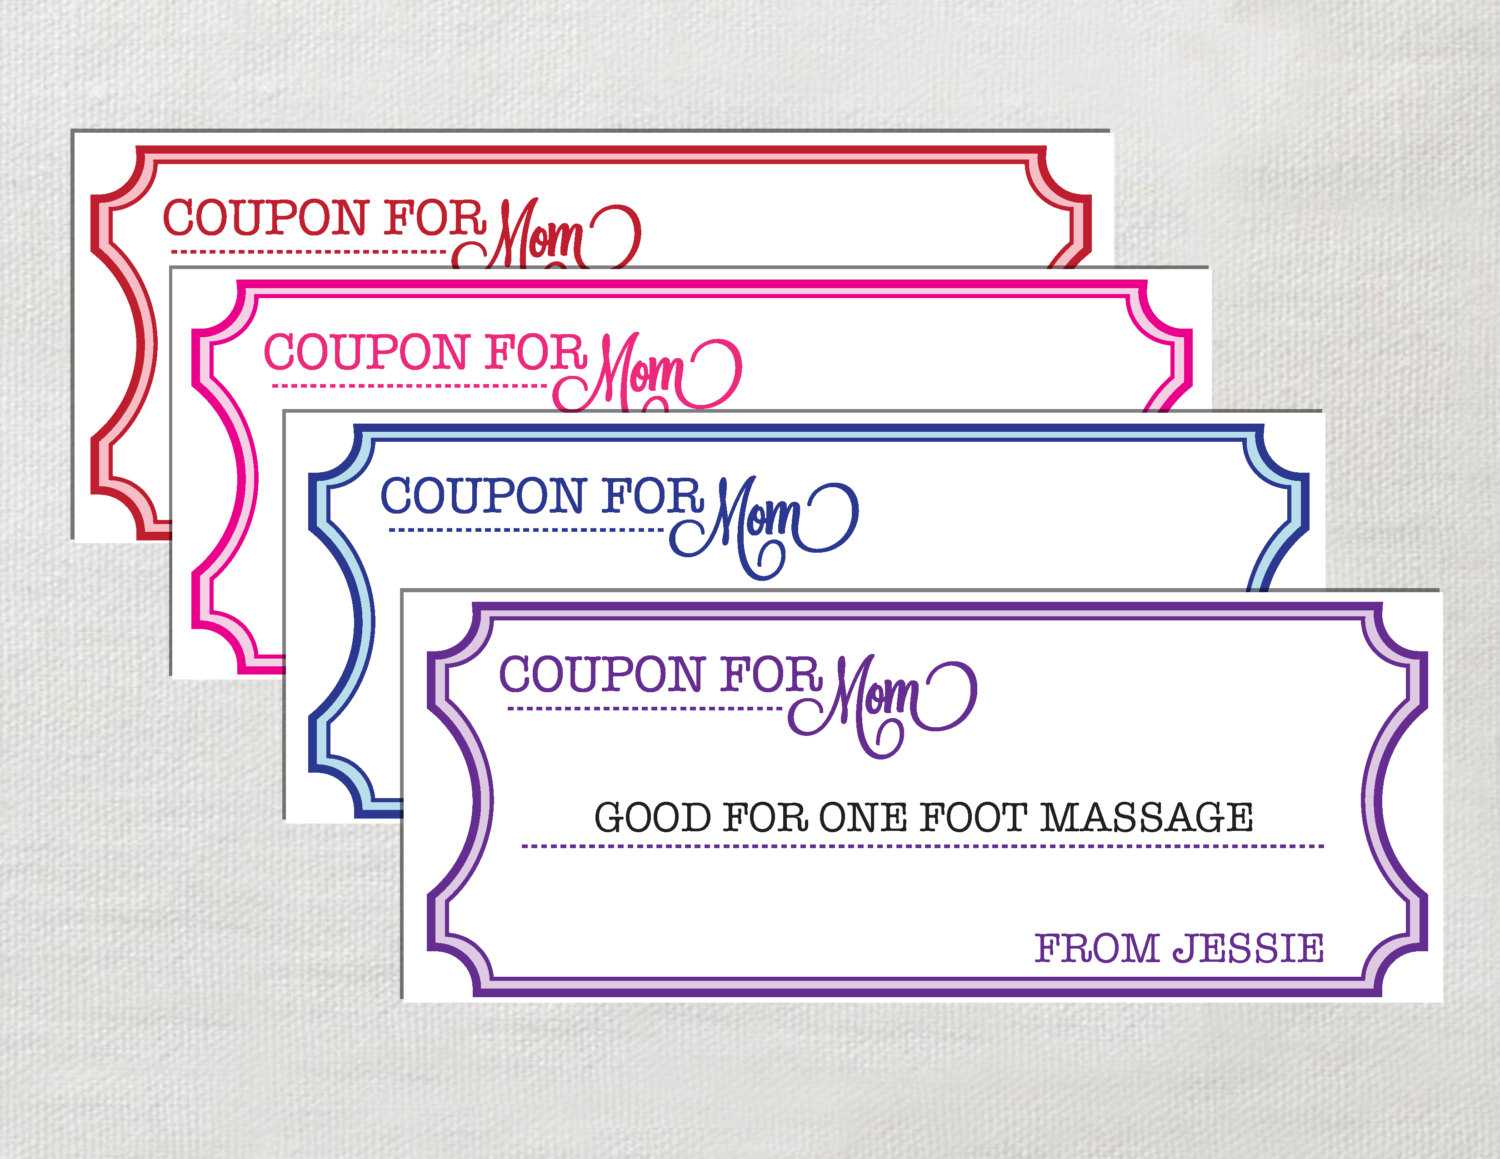 Coupon Template Free Word ] – Doc 585450 Coupon Template For Inside Love Coupon Template For Word